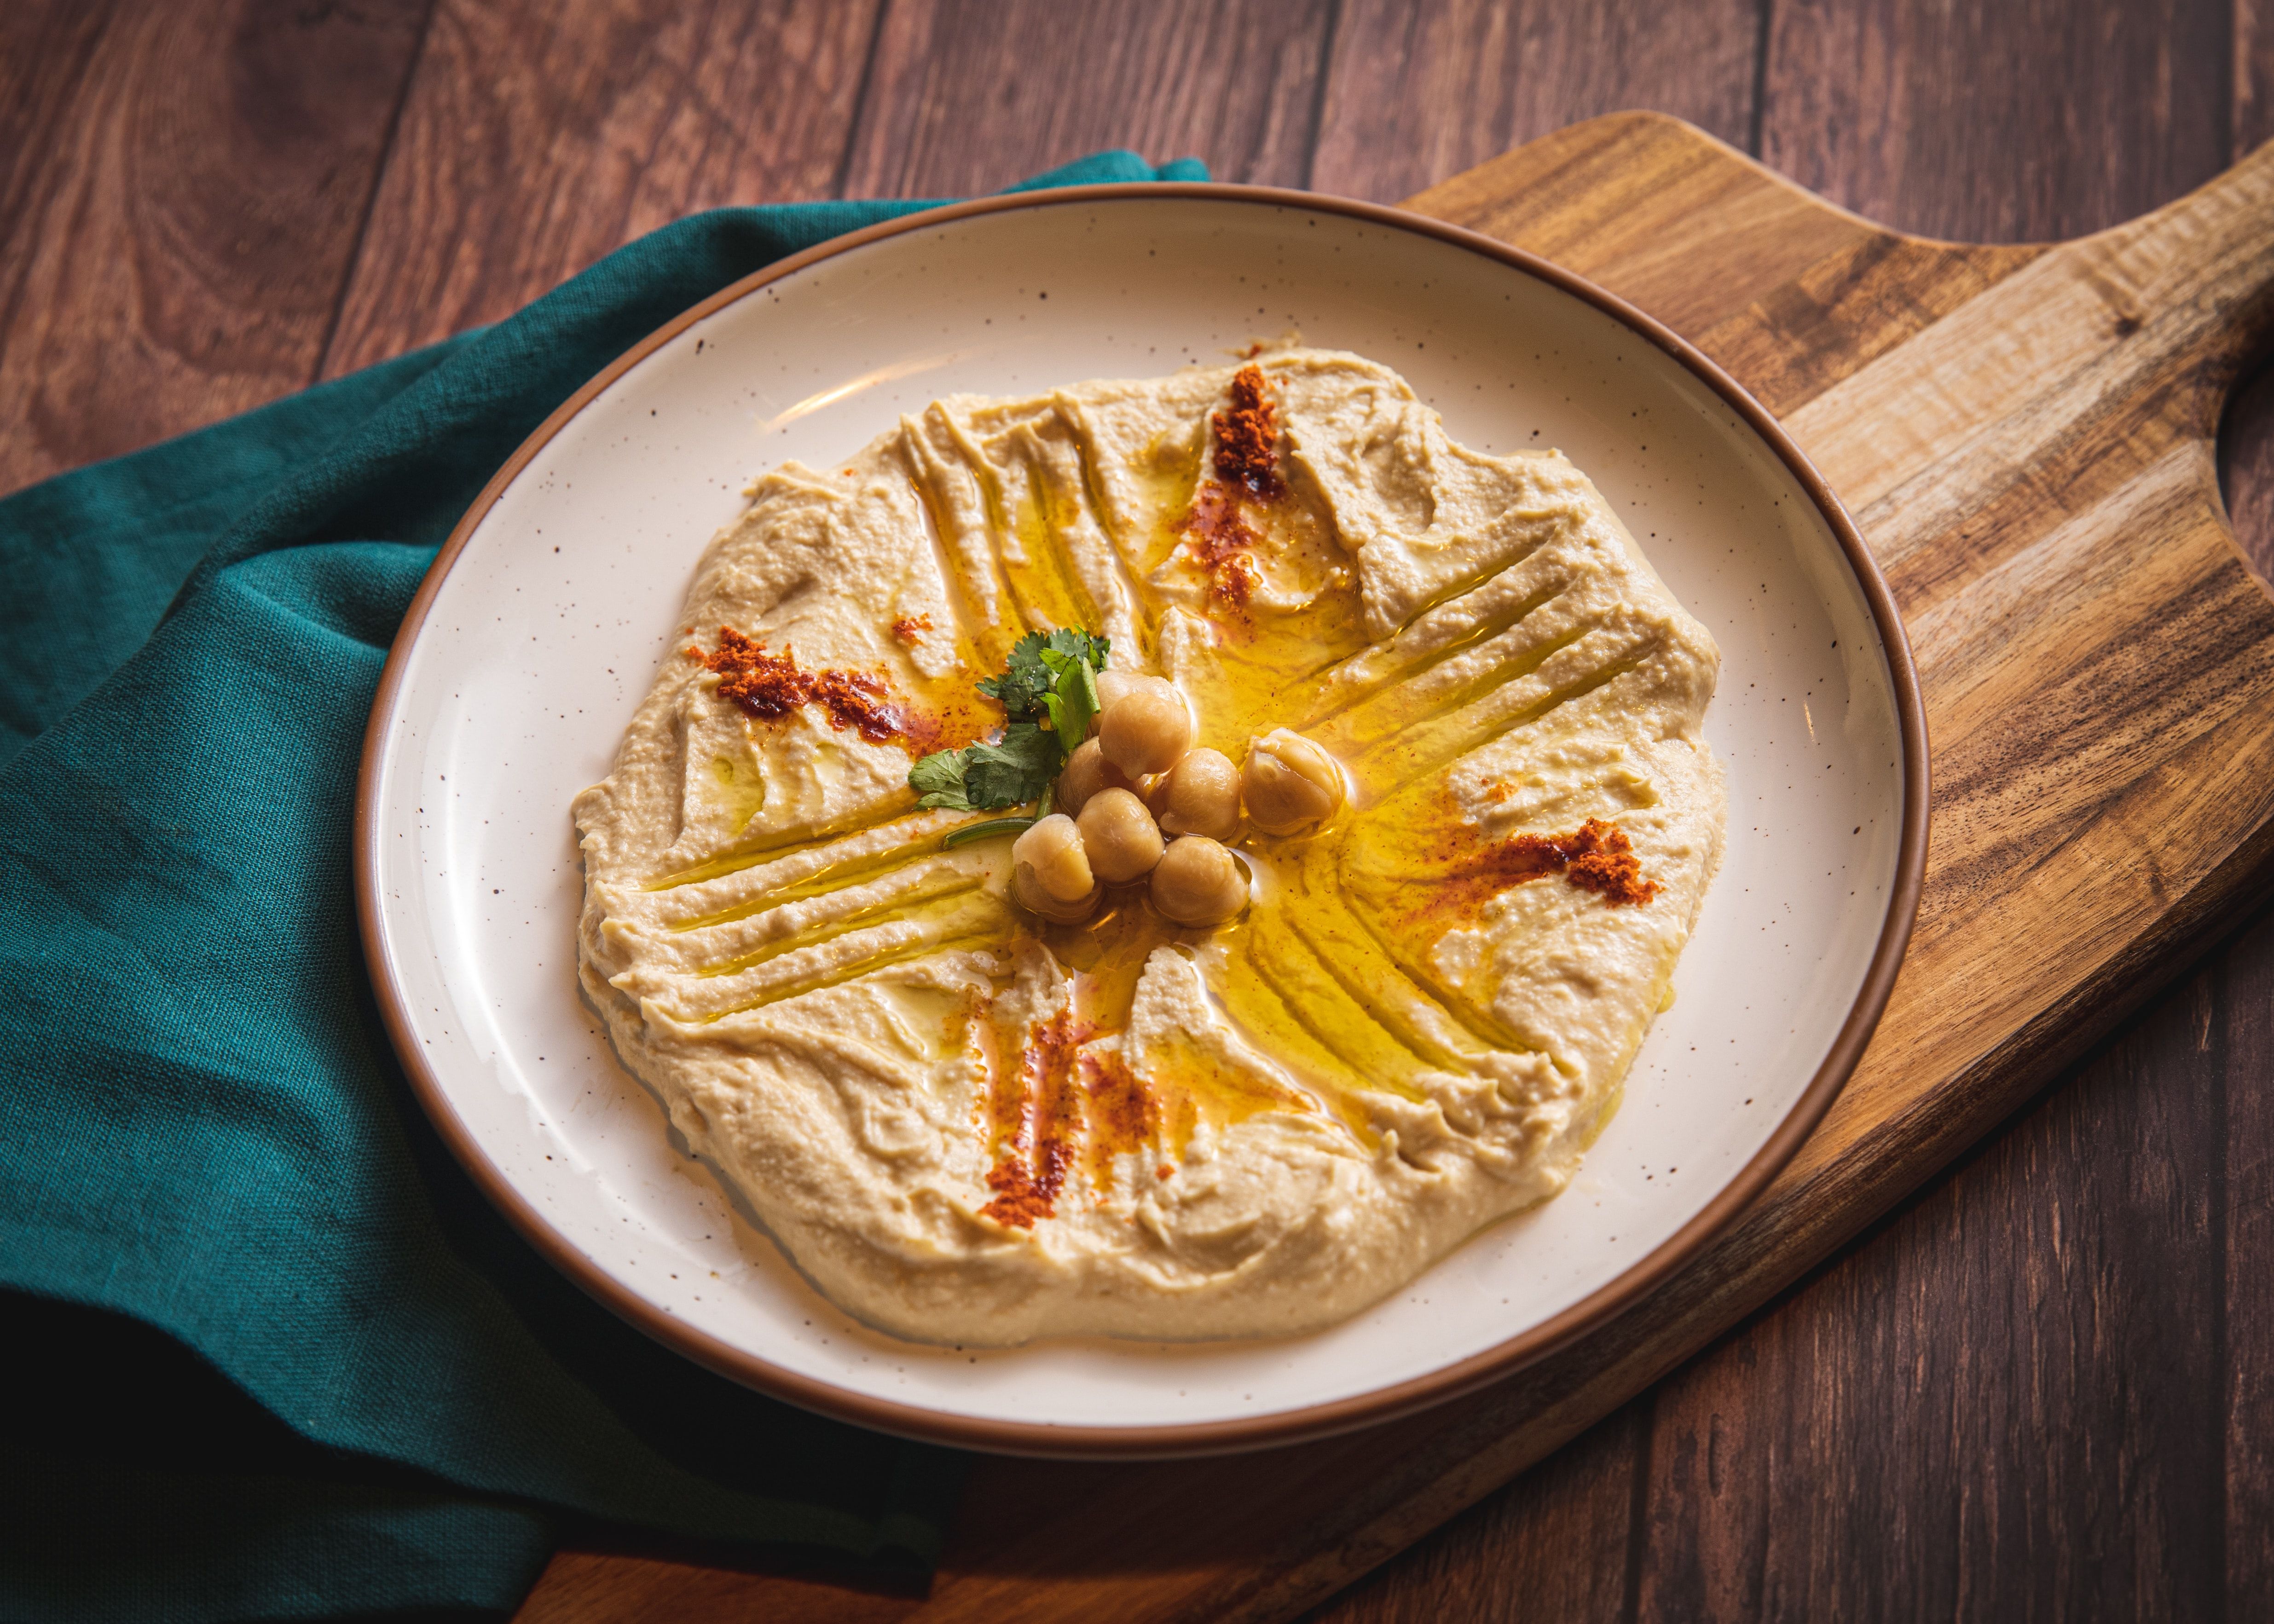 Fresh hummus with olive oil and spices